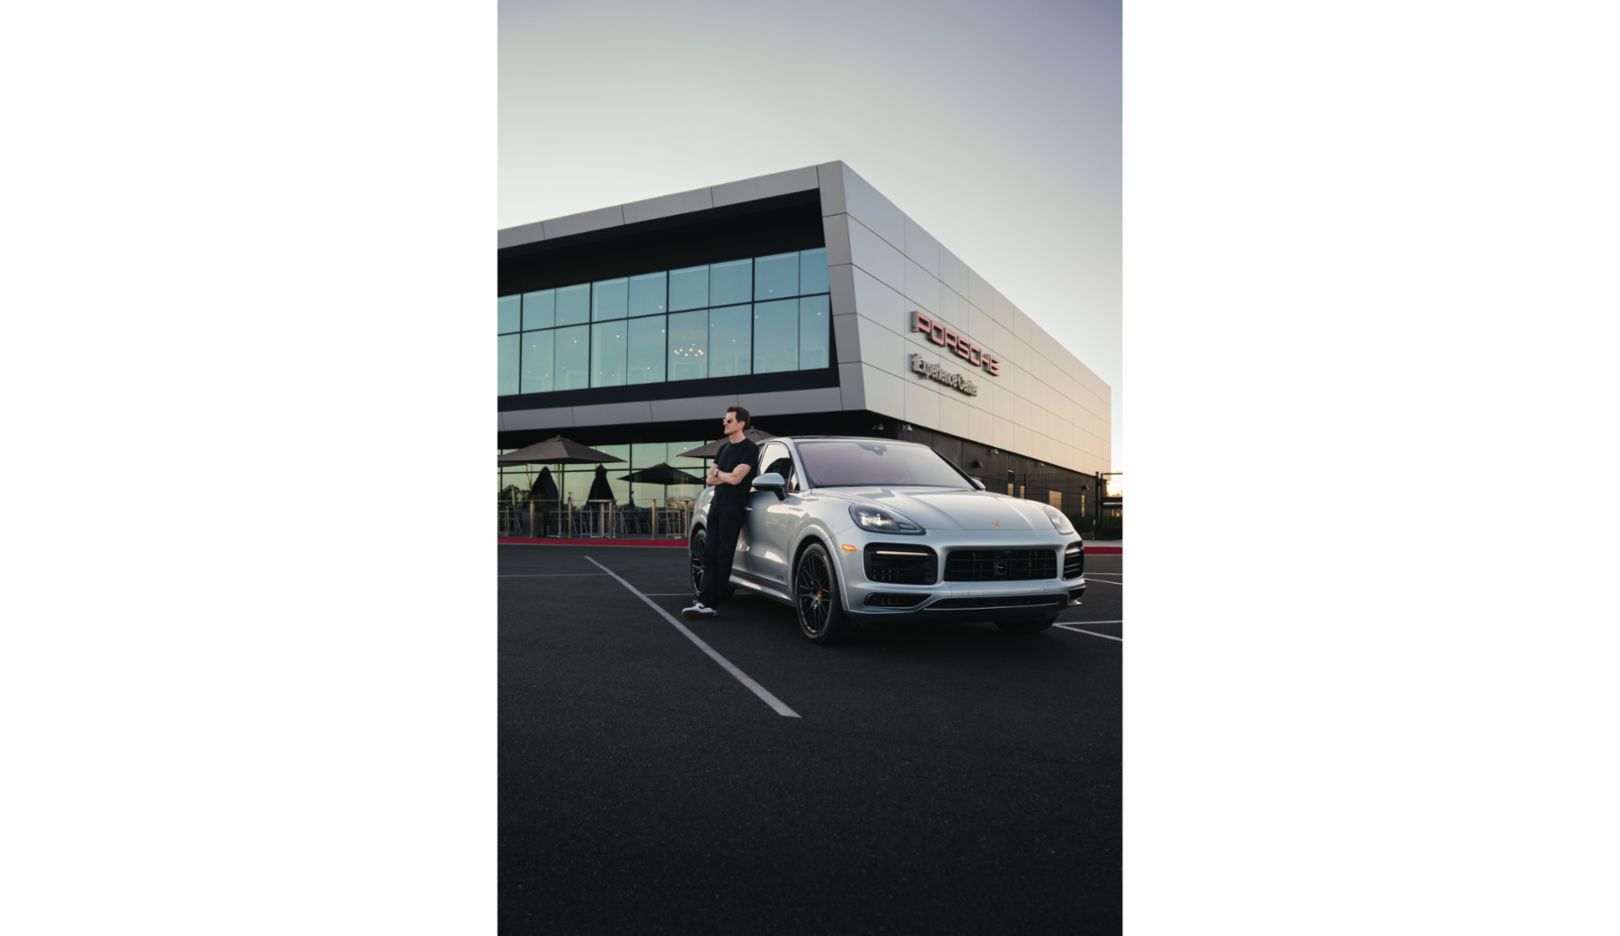 Driving practice: every few months, the director trains on the track at the Porsche Experience Center in Los Angeles.